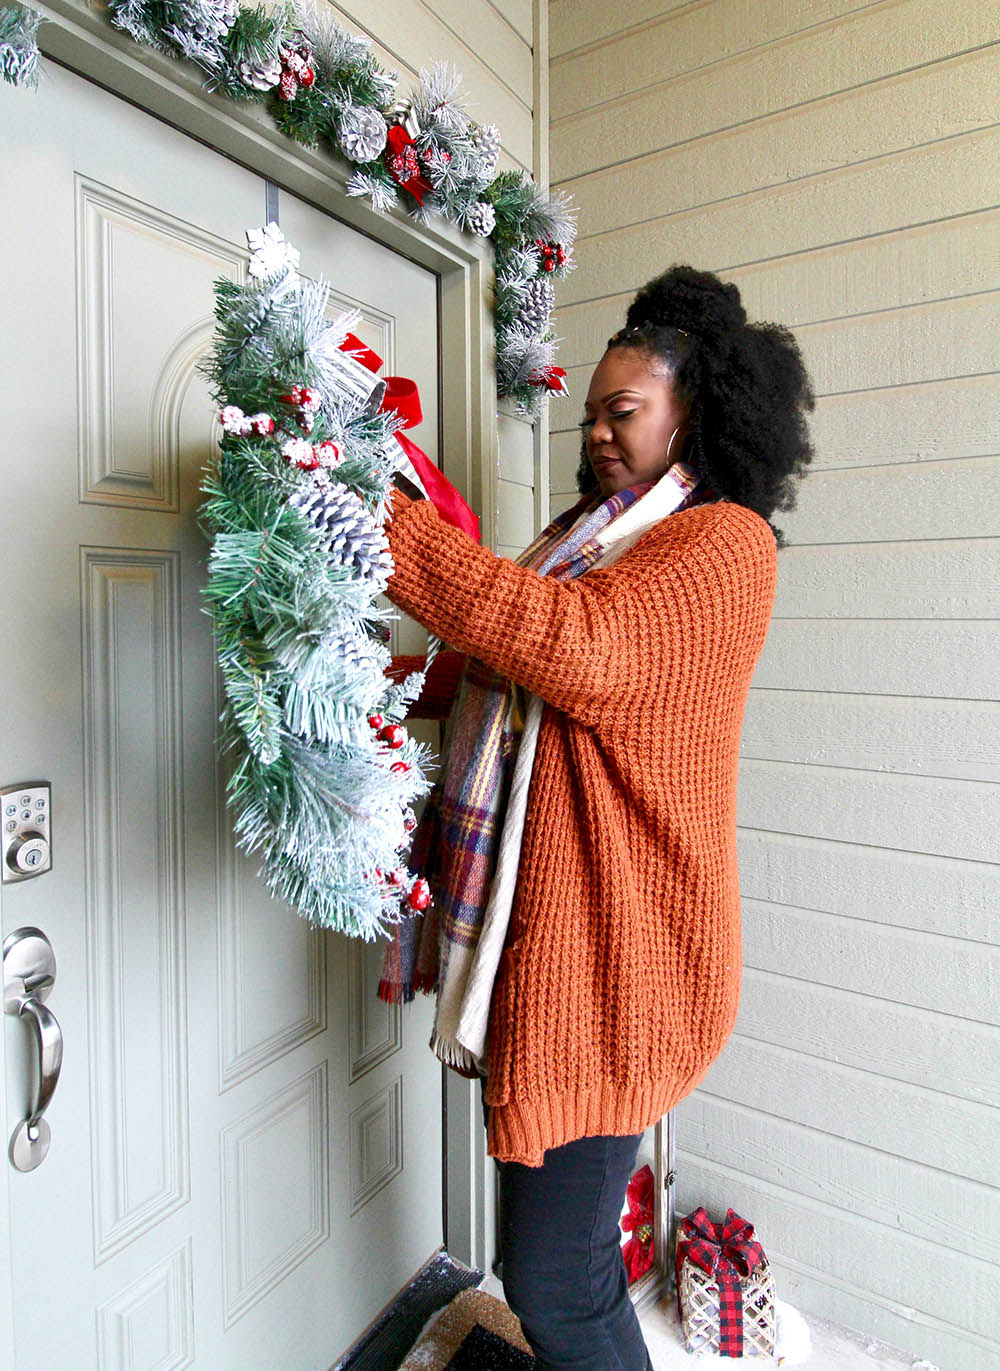 A woman hanging a Christmas wreath on a front door.